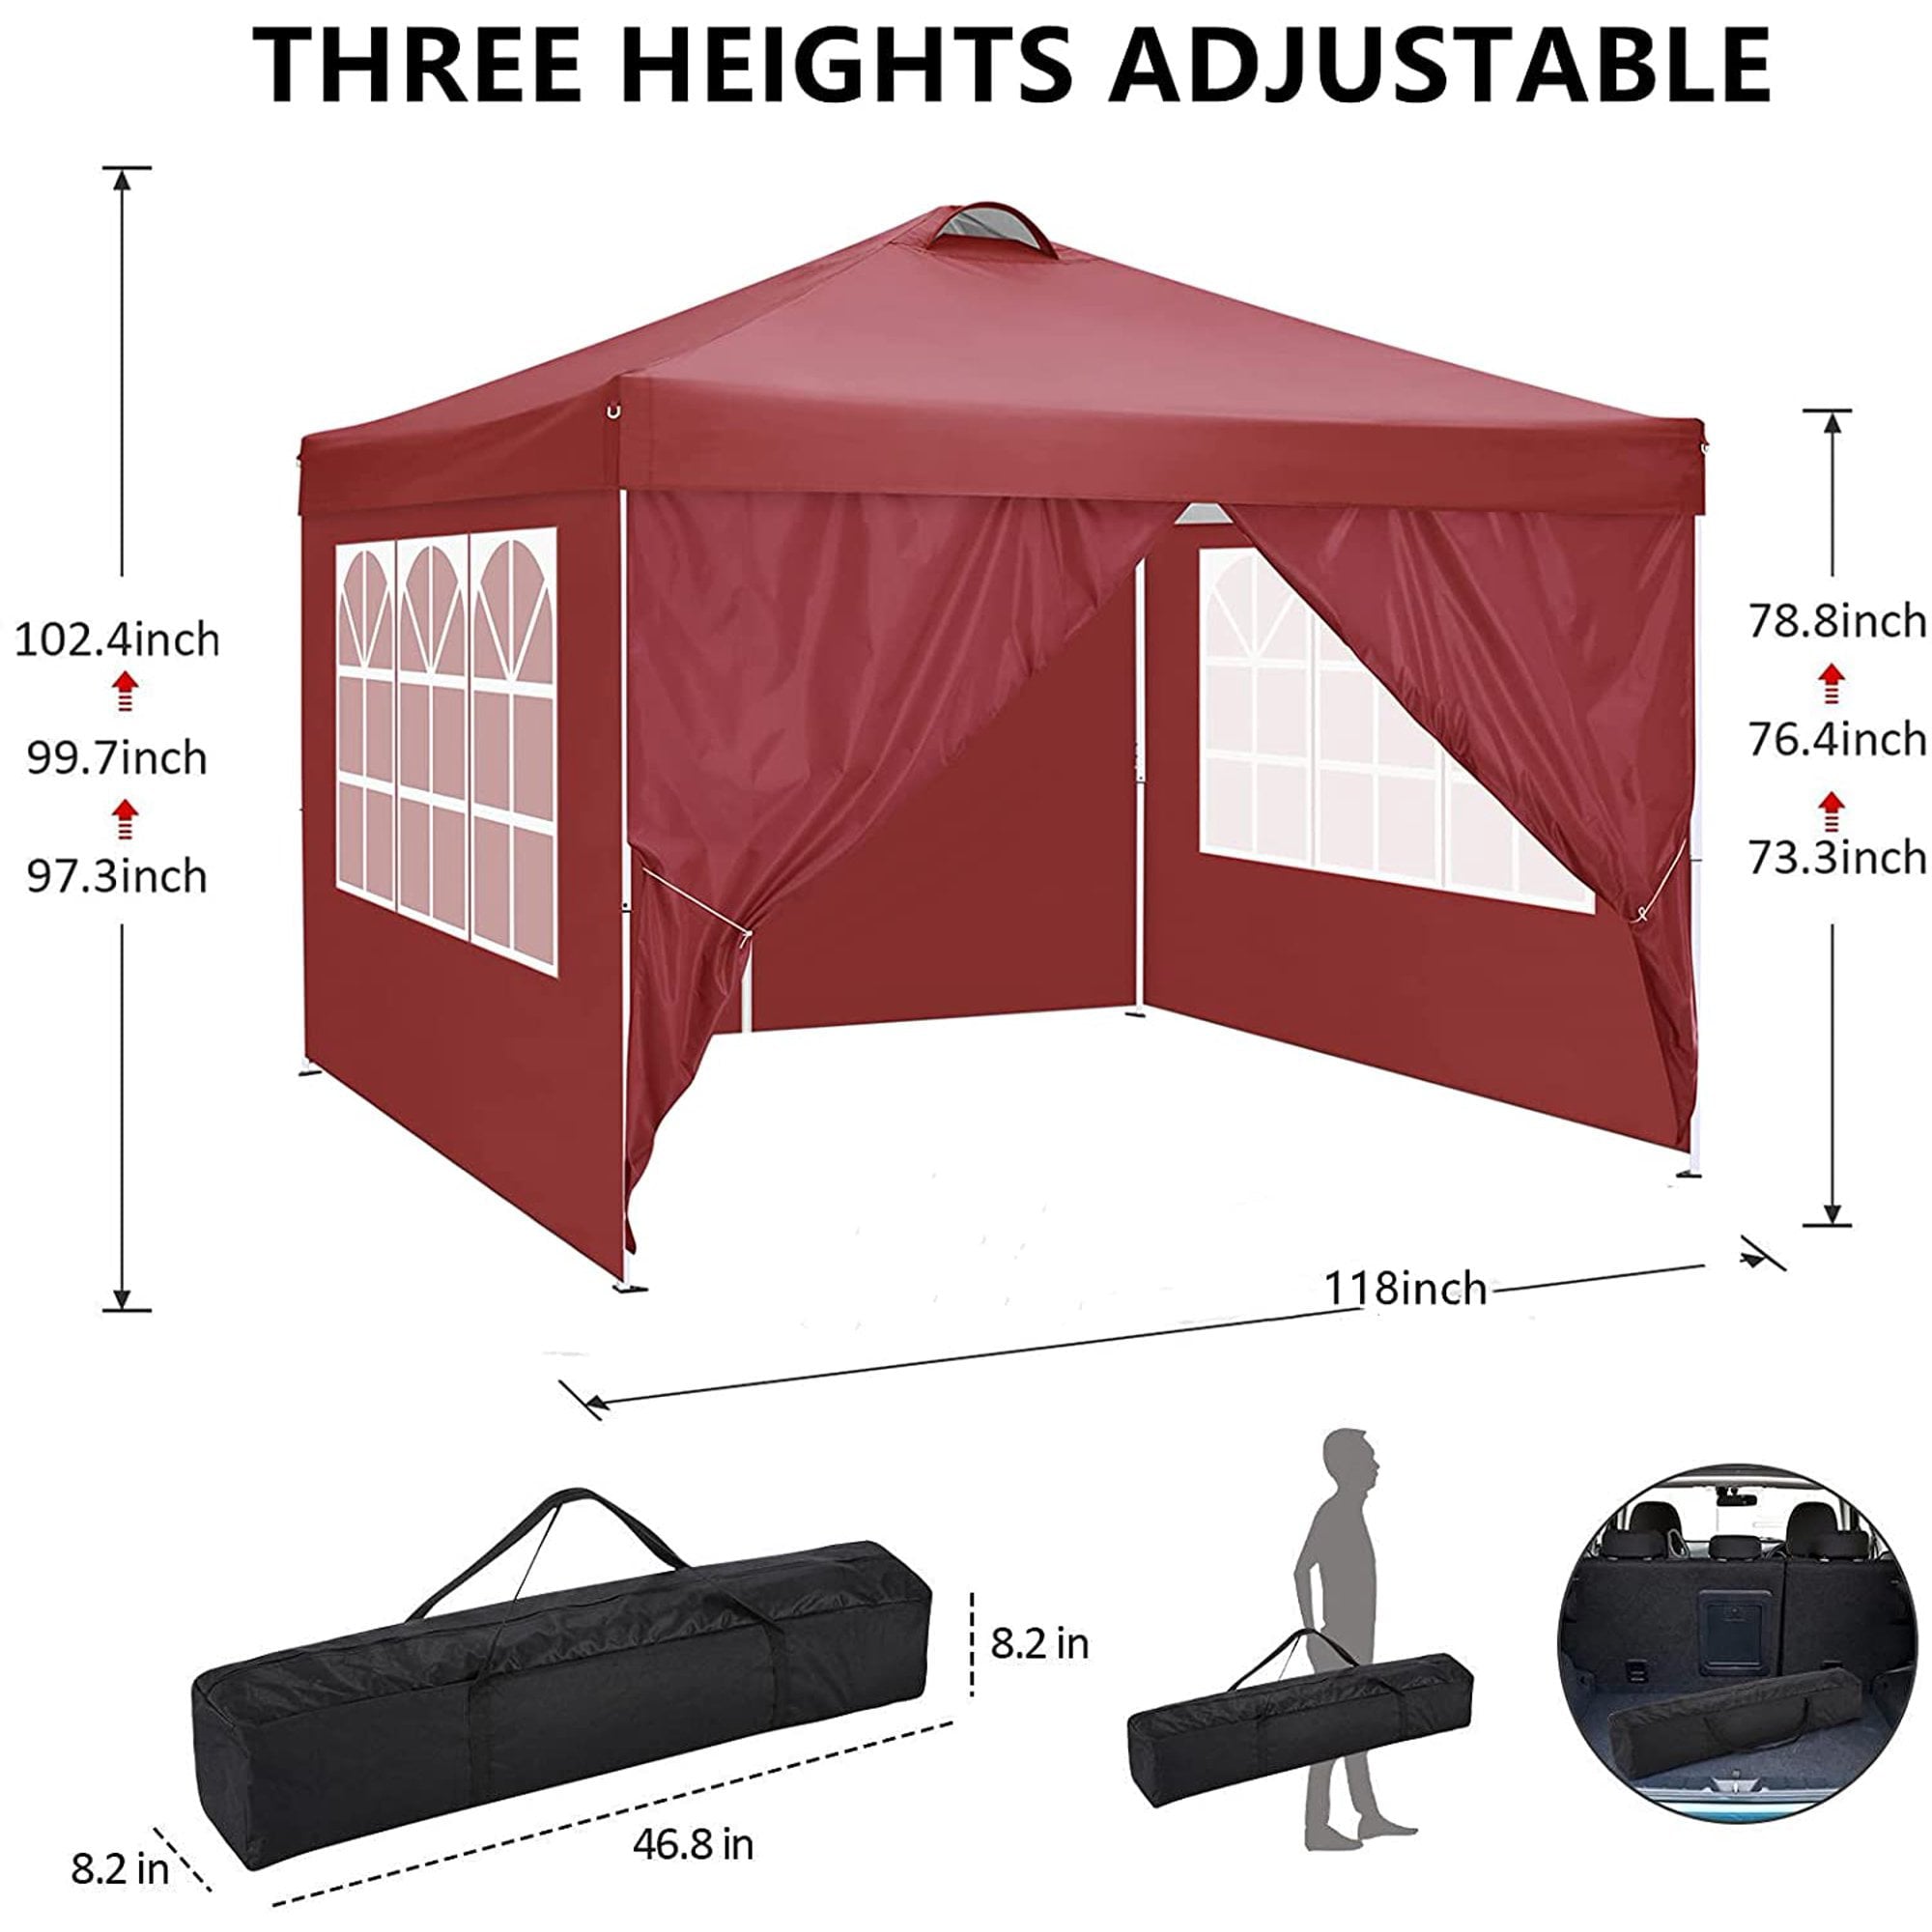 10' x 10' Canopy Tent Party Tent UV/Sun/Rain Protection Straight Leg Instant Pop Up Canopy Tent, Height Ajustable Beach Shade Tent Gazebo w/4 Removable Sidewalls, Carry Bag, 4 Sandbags, Red